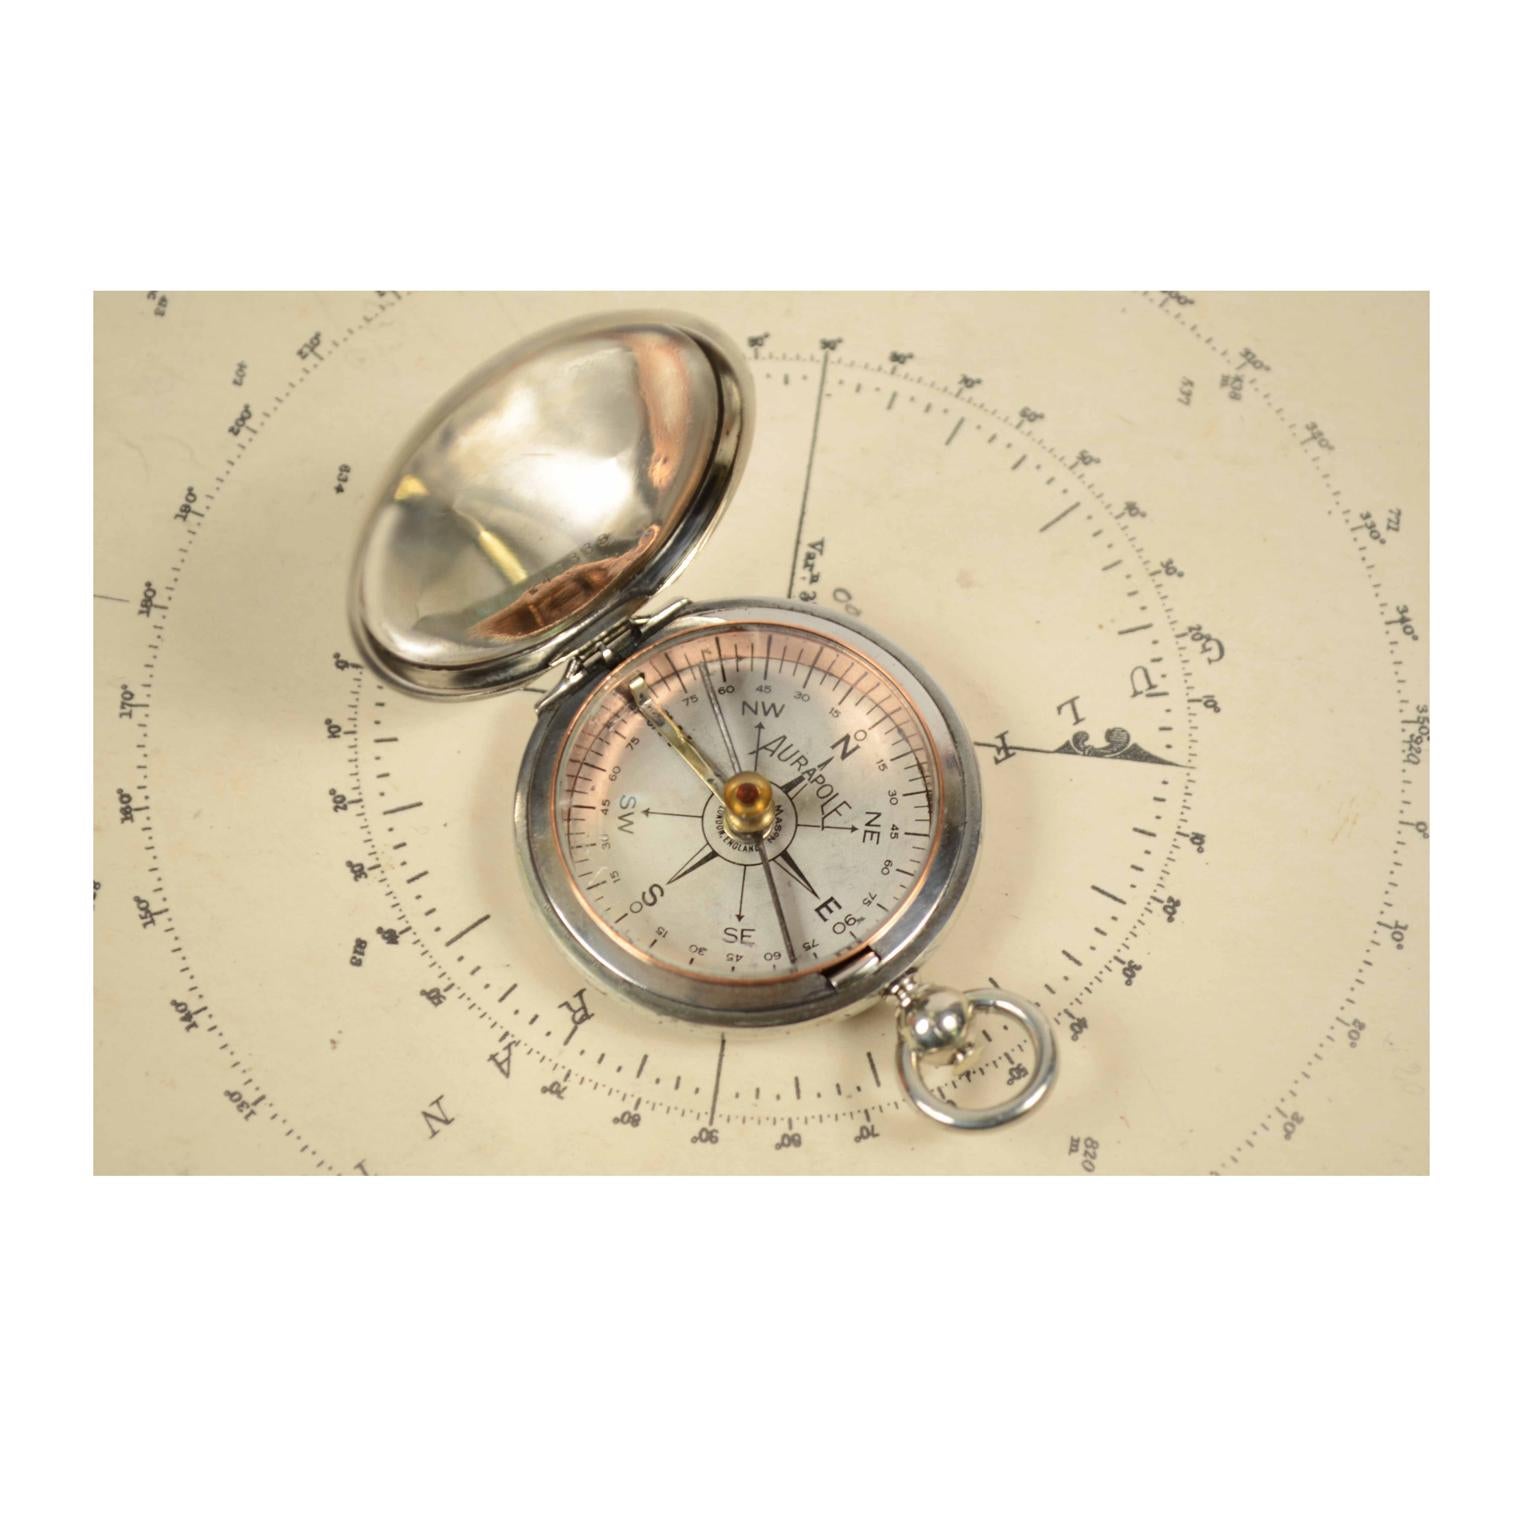 Pocket compass, 1915, of chromed brass in the shape of a pocket watch, signed Aurapole Short & Mason London, England. The compass has a snap-on cover with release button inside the ring. Compass card with eight winds complete with a goniometric